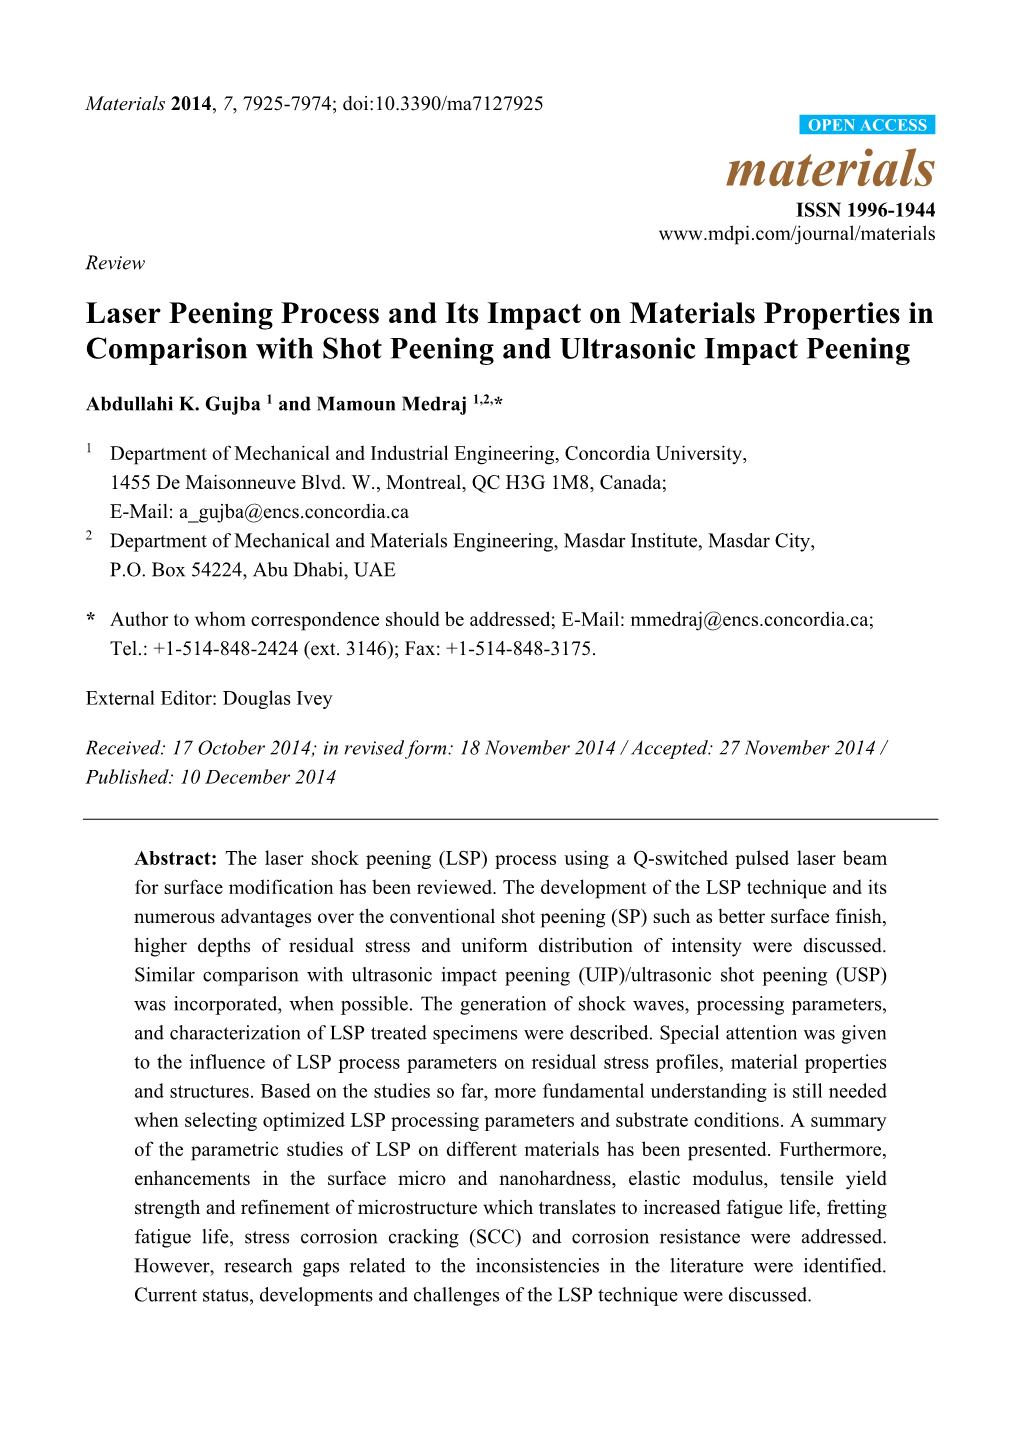 Laser Peening Process and Its Impact on Materials Properties in Comparison with Shot Peening and Ultrasonic Impact Peening